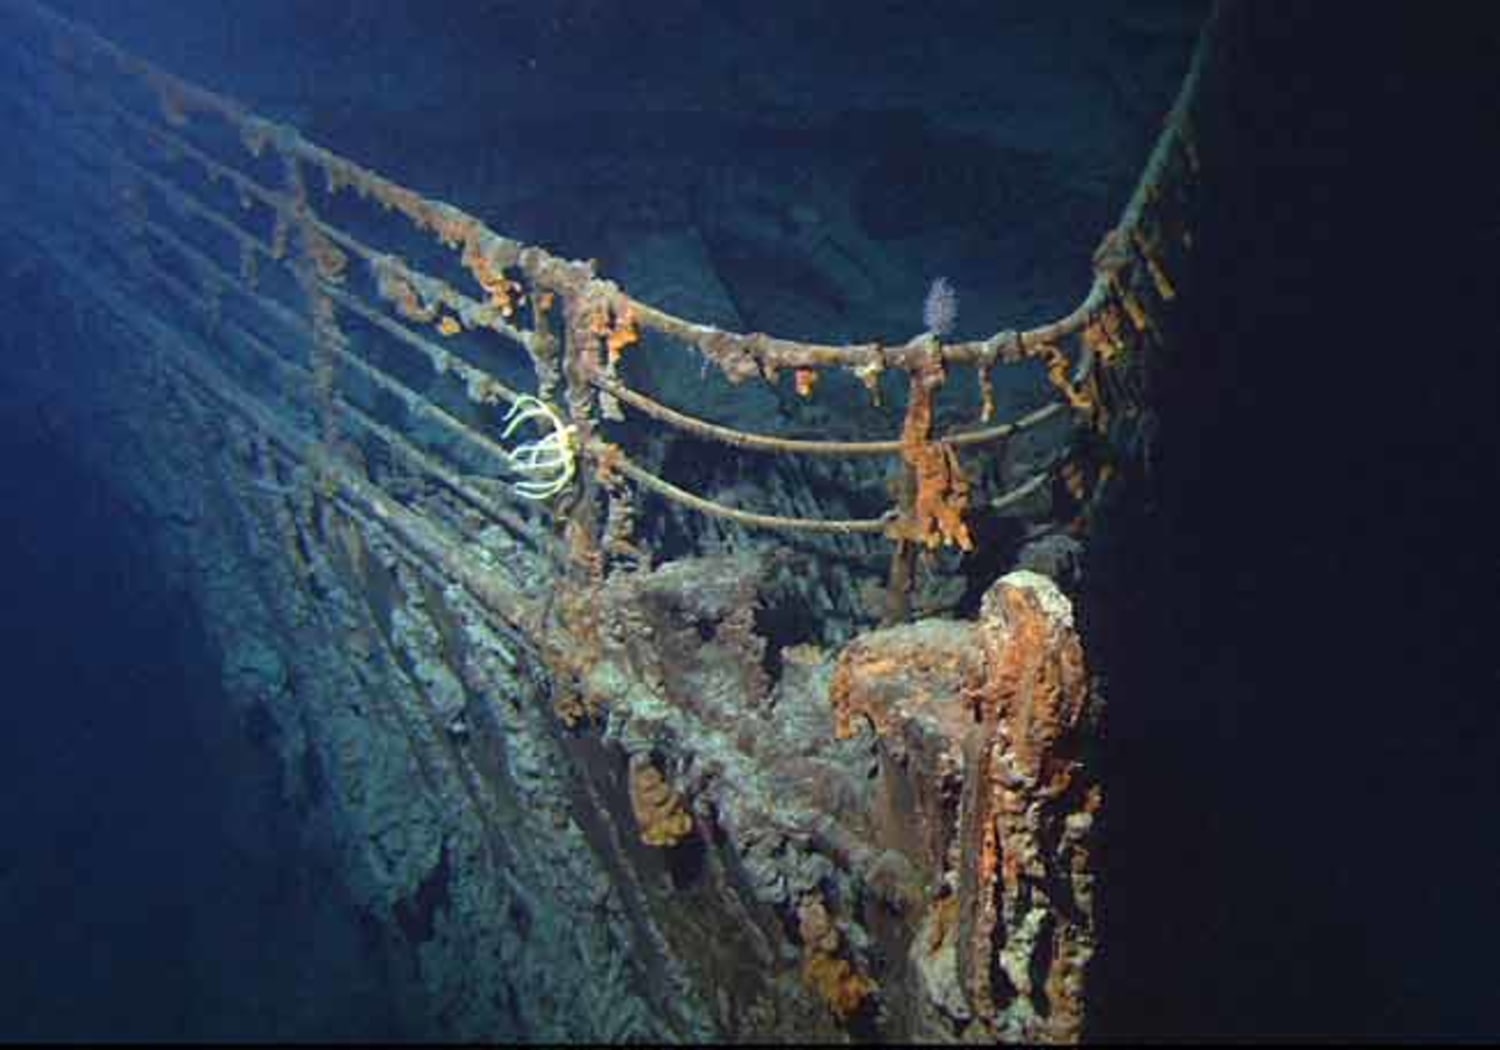 Could an accident like Titanic happen again?